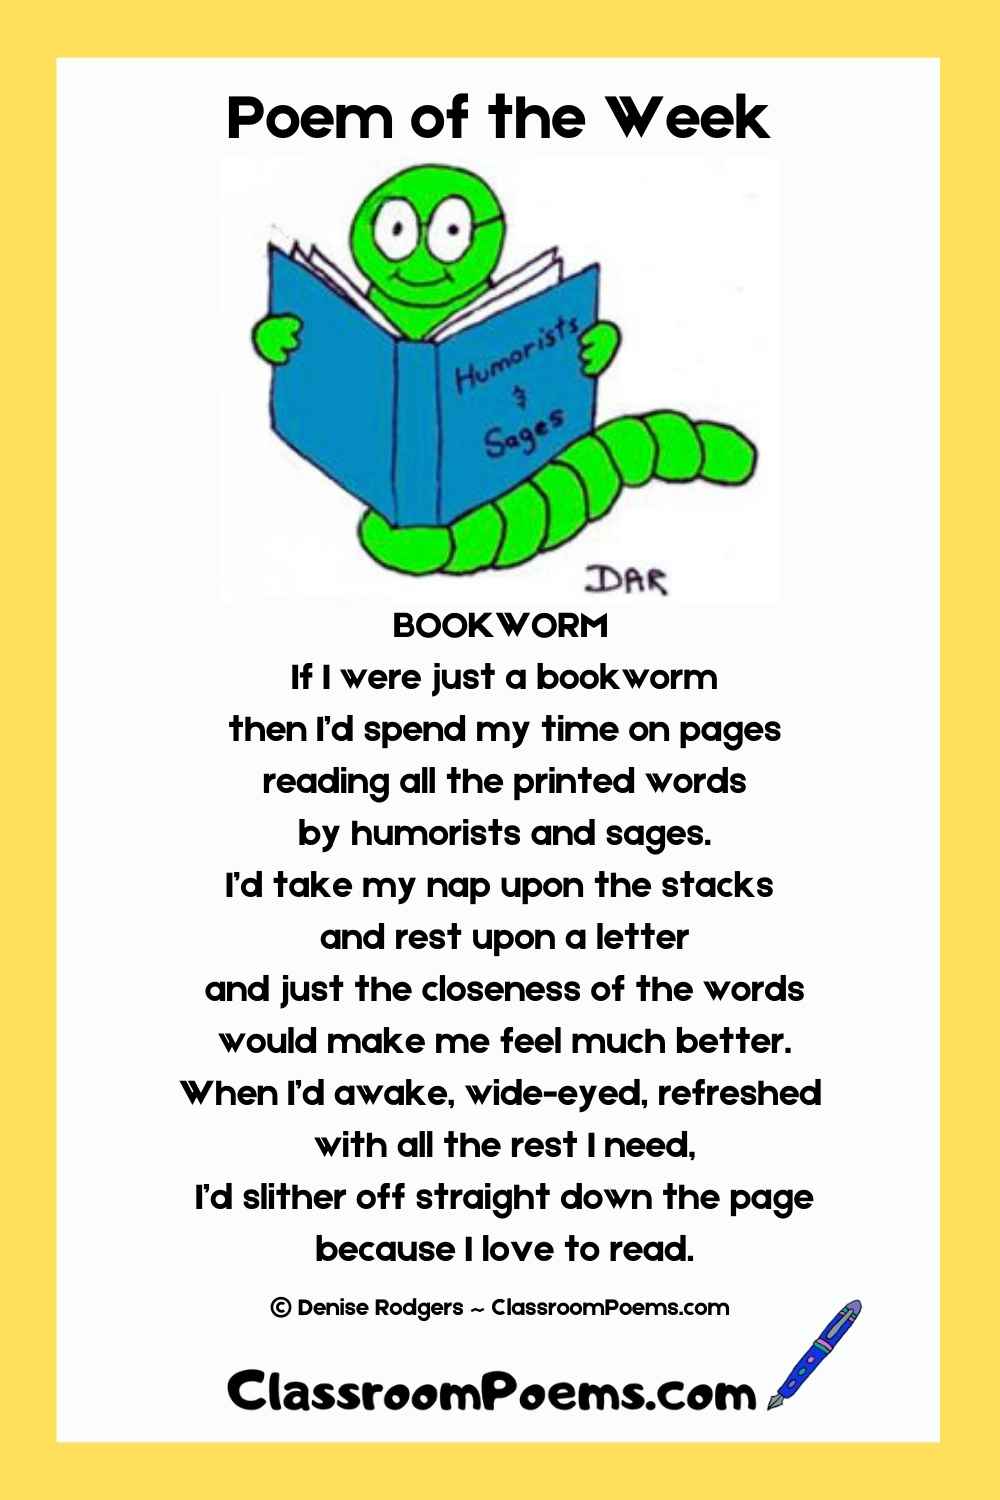 Bookworm poem of the week by Denise Rodgers on ClassroomPoems.com.